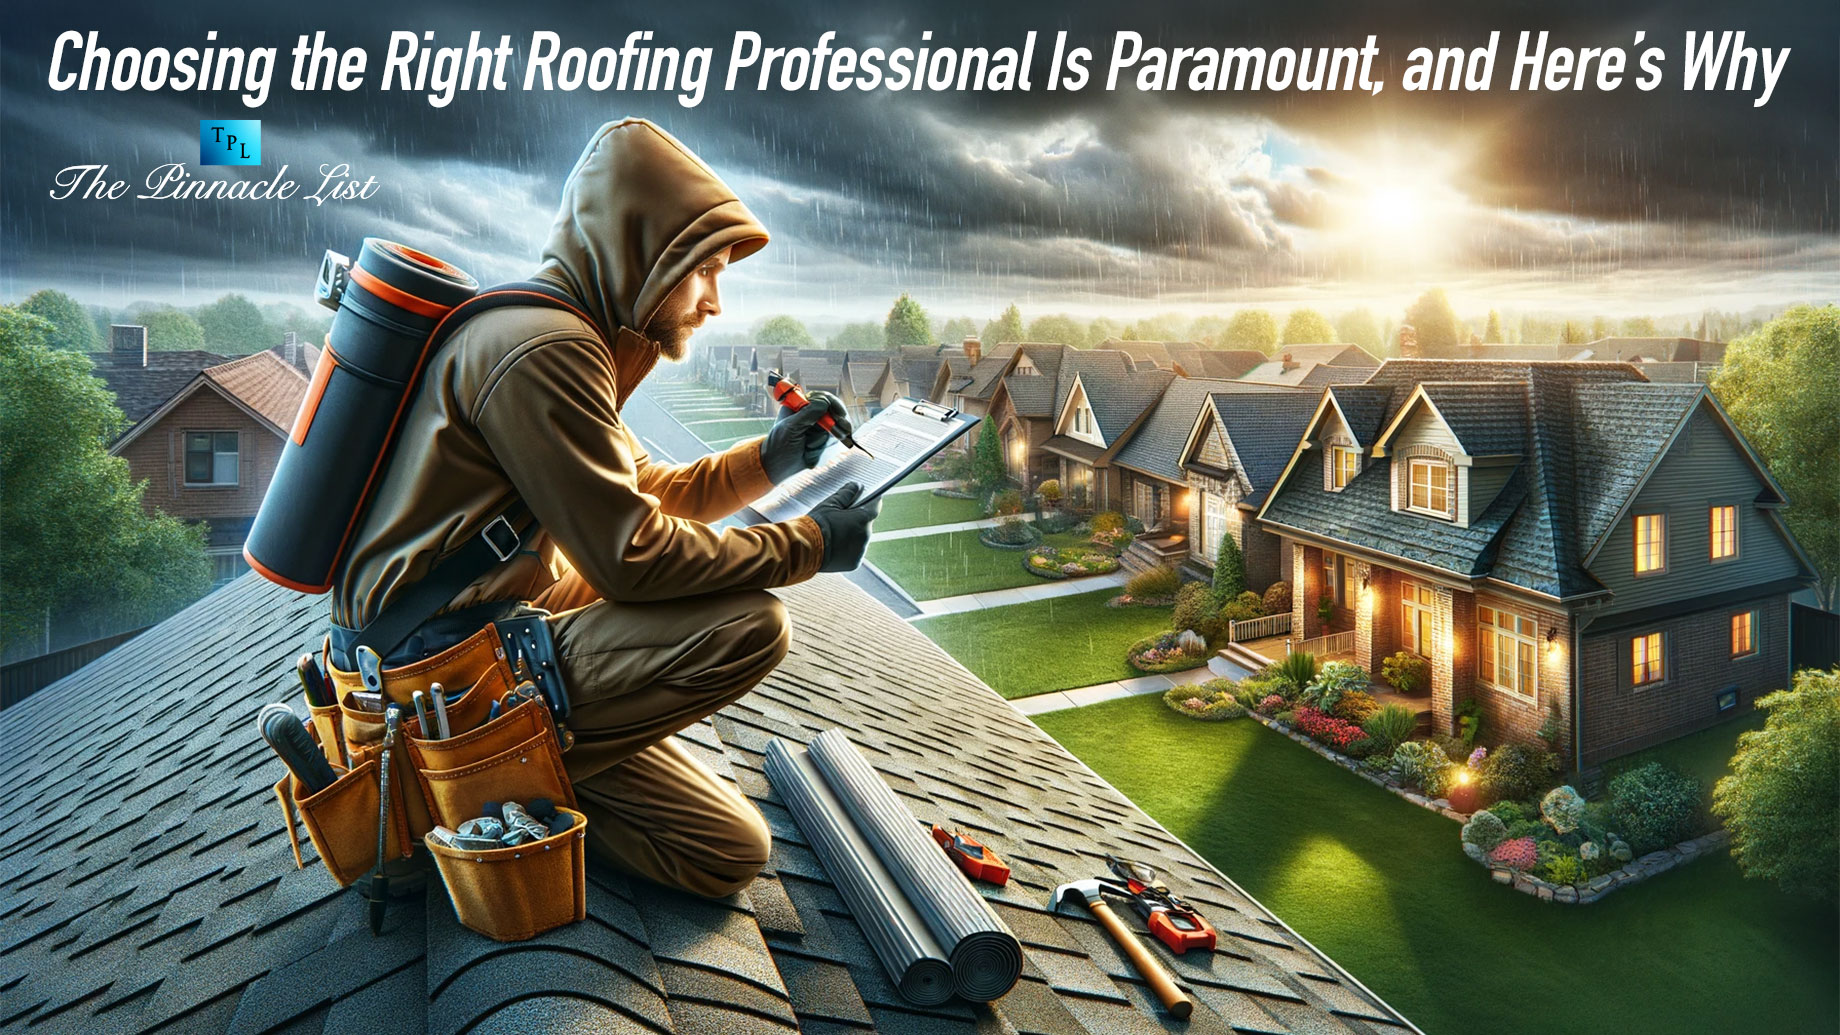 Choosing the Right Roofing Professional Is Paramount, and Here’s Why